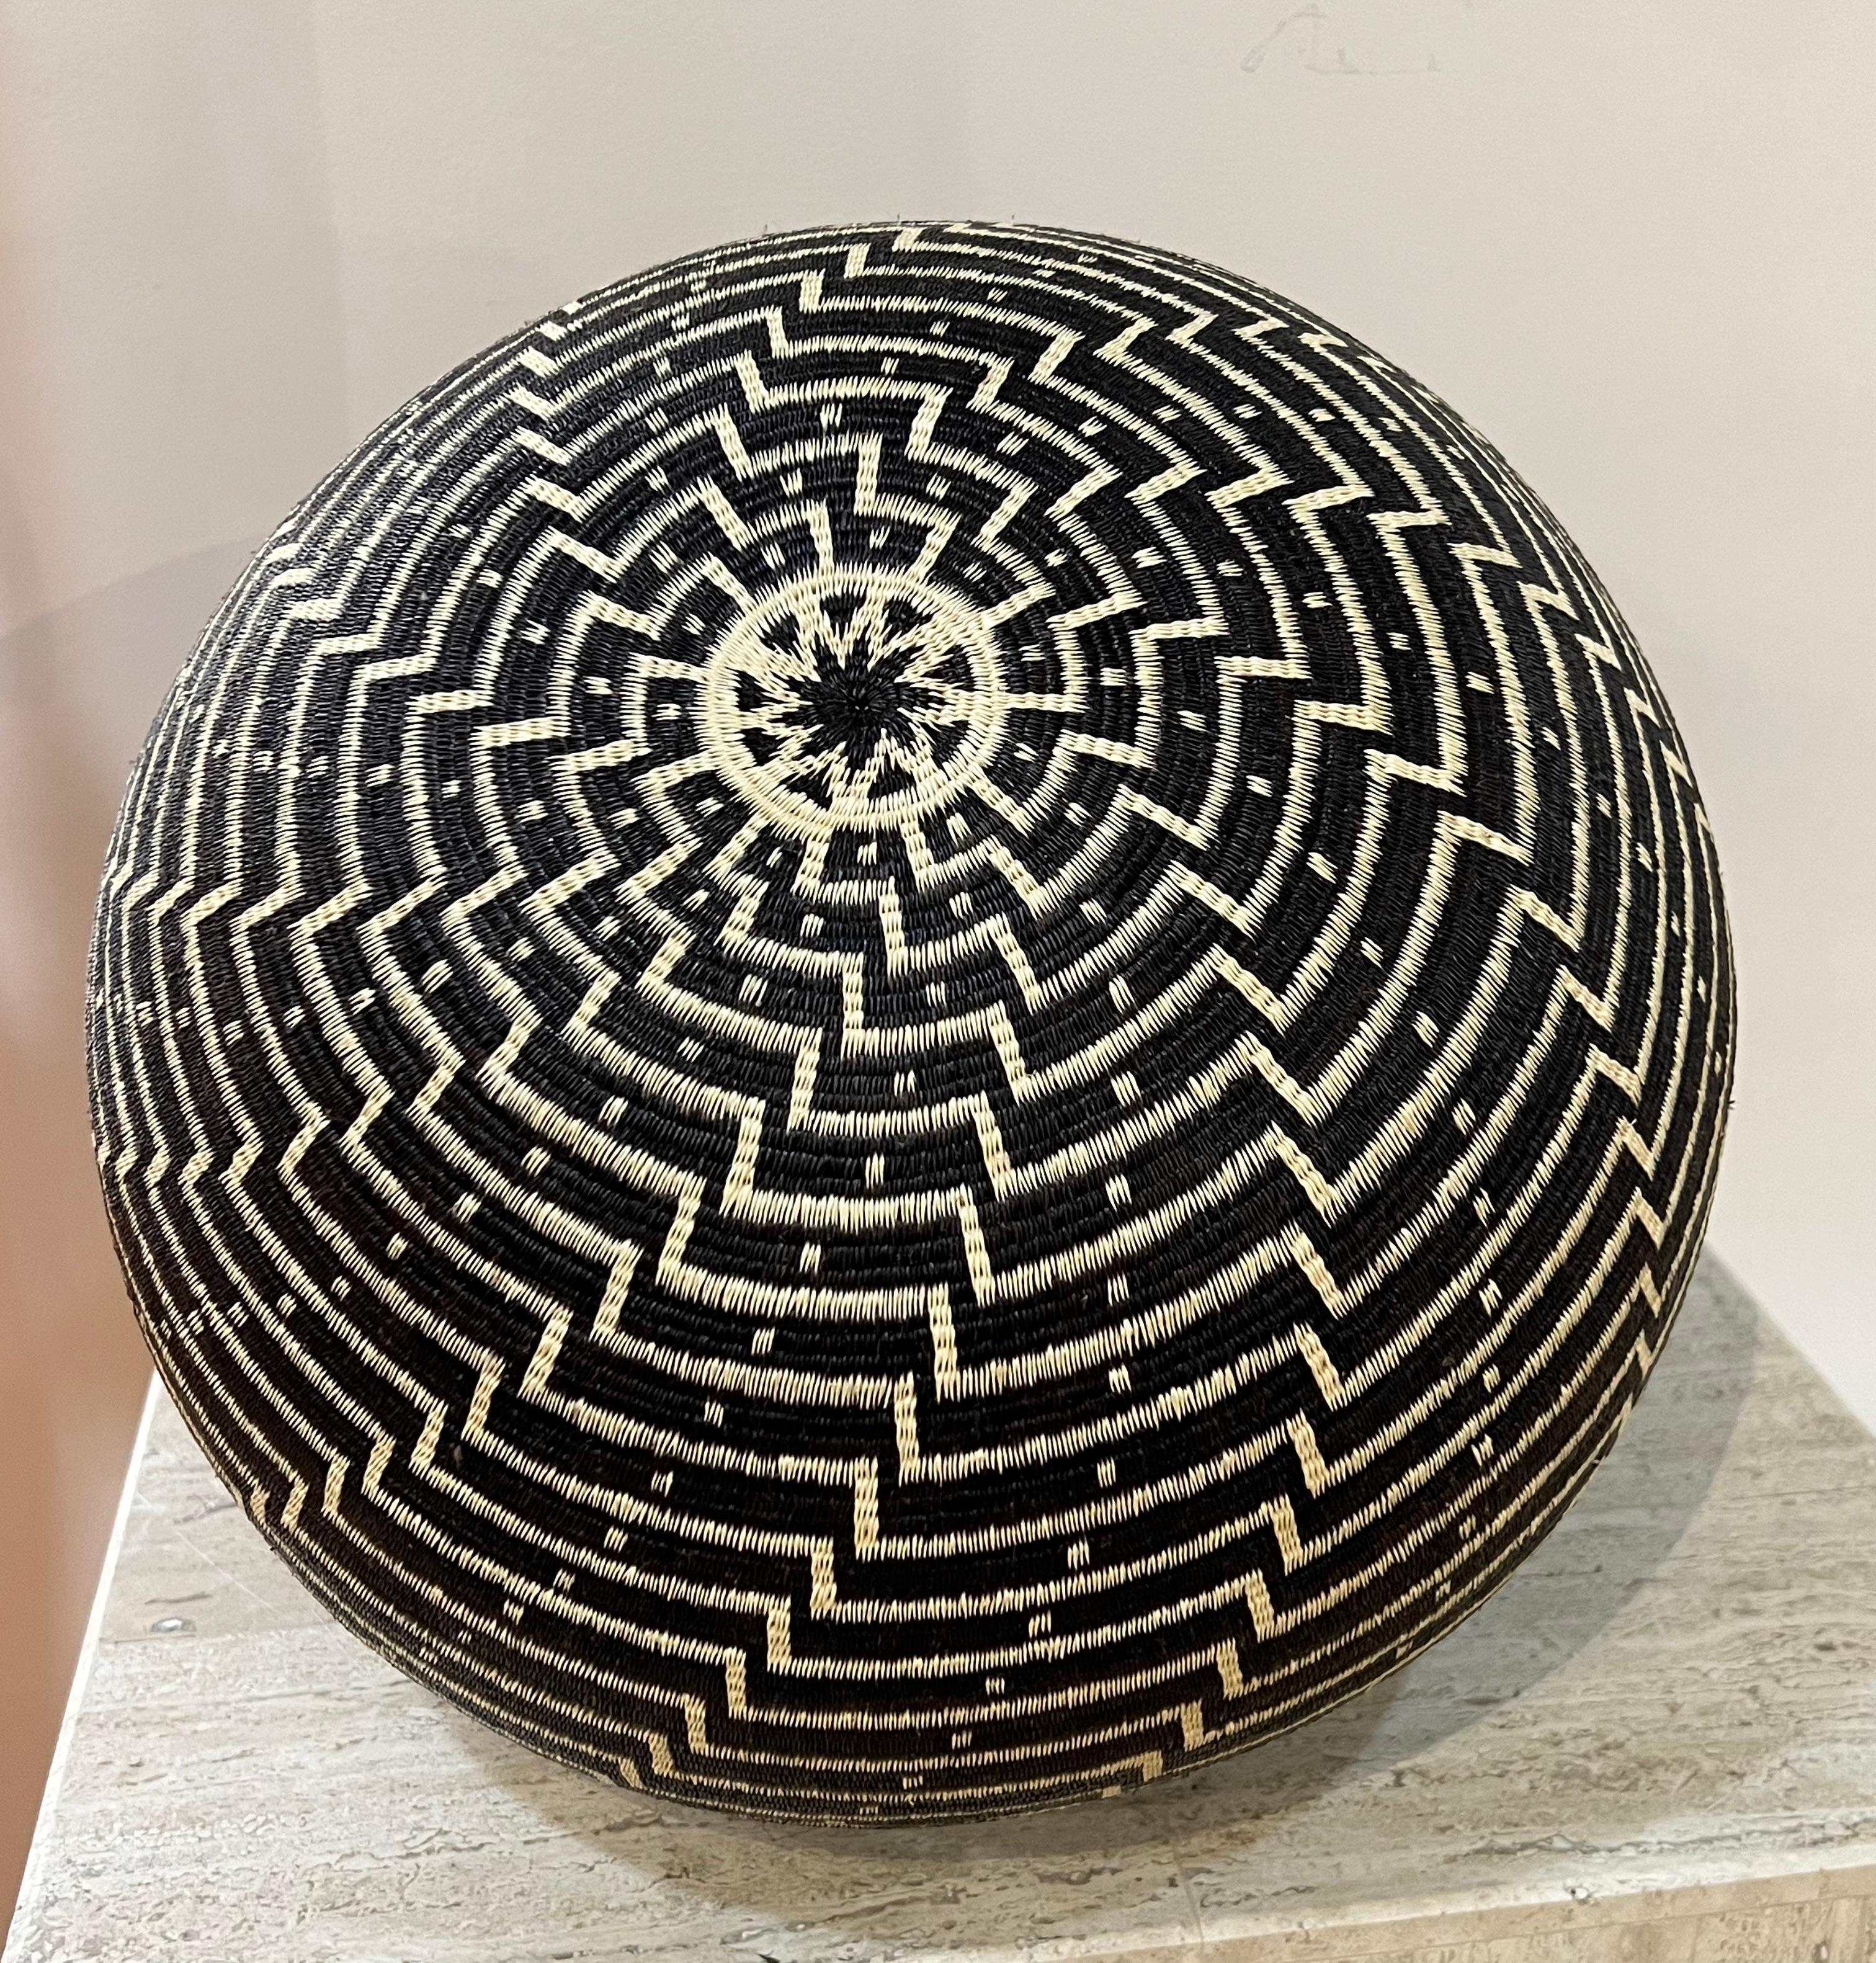 Black and White Basket, Wounaan Tribe, Panama, Rainforest, Geometric, round

The baskets are made by the Wounaan and Embera Indians from the Darien Rainforest in Panama.  The Wounaan believe they emerged from the palm tree. They weave baskets from